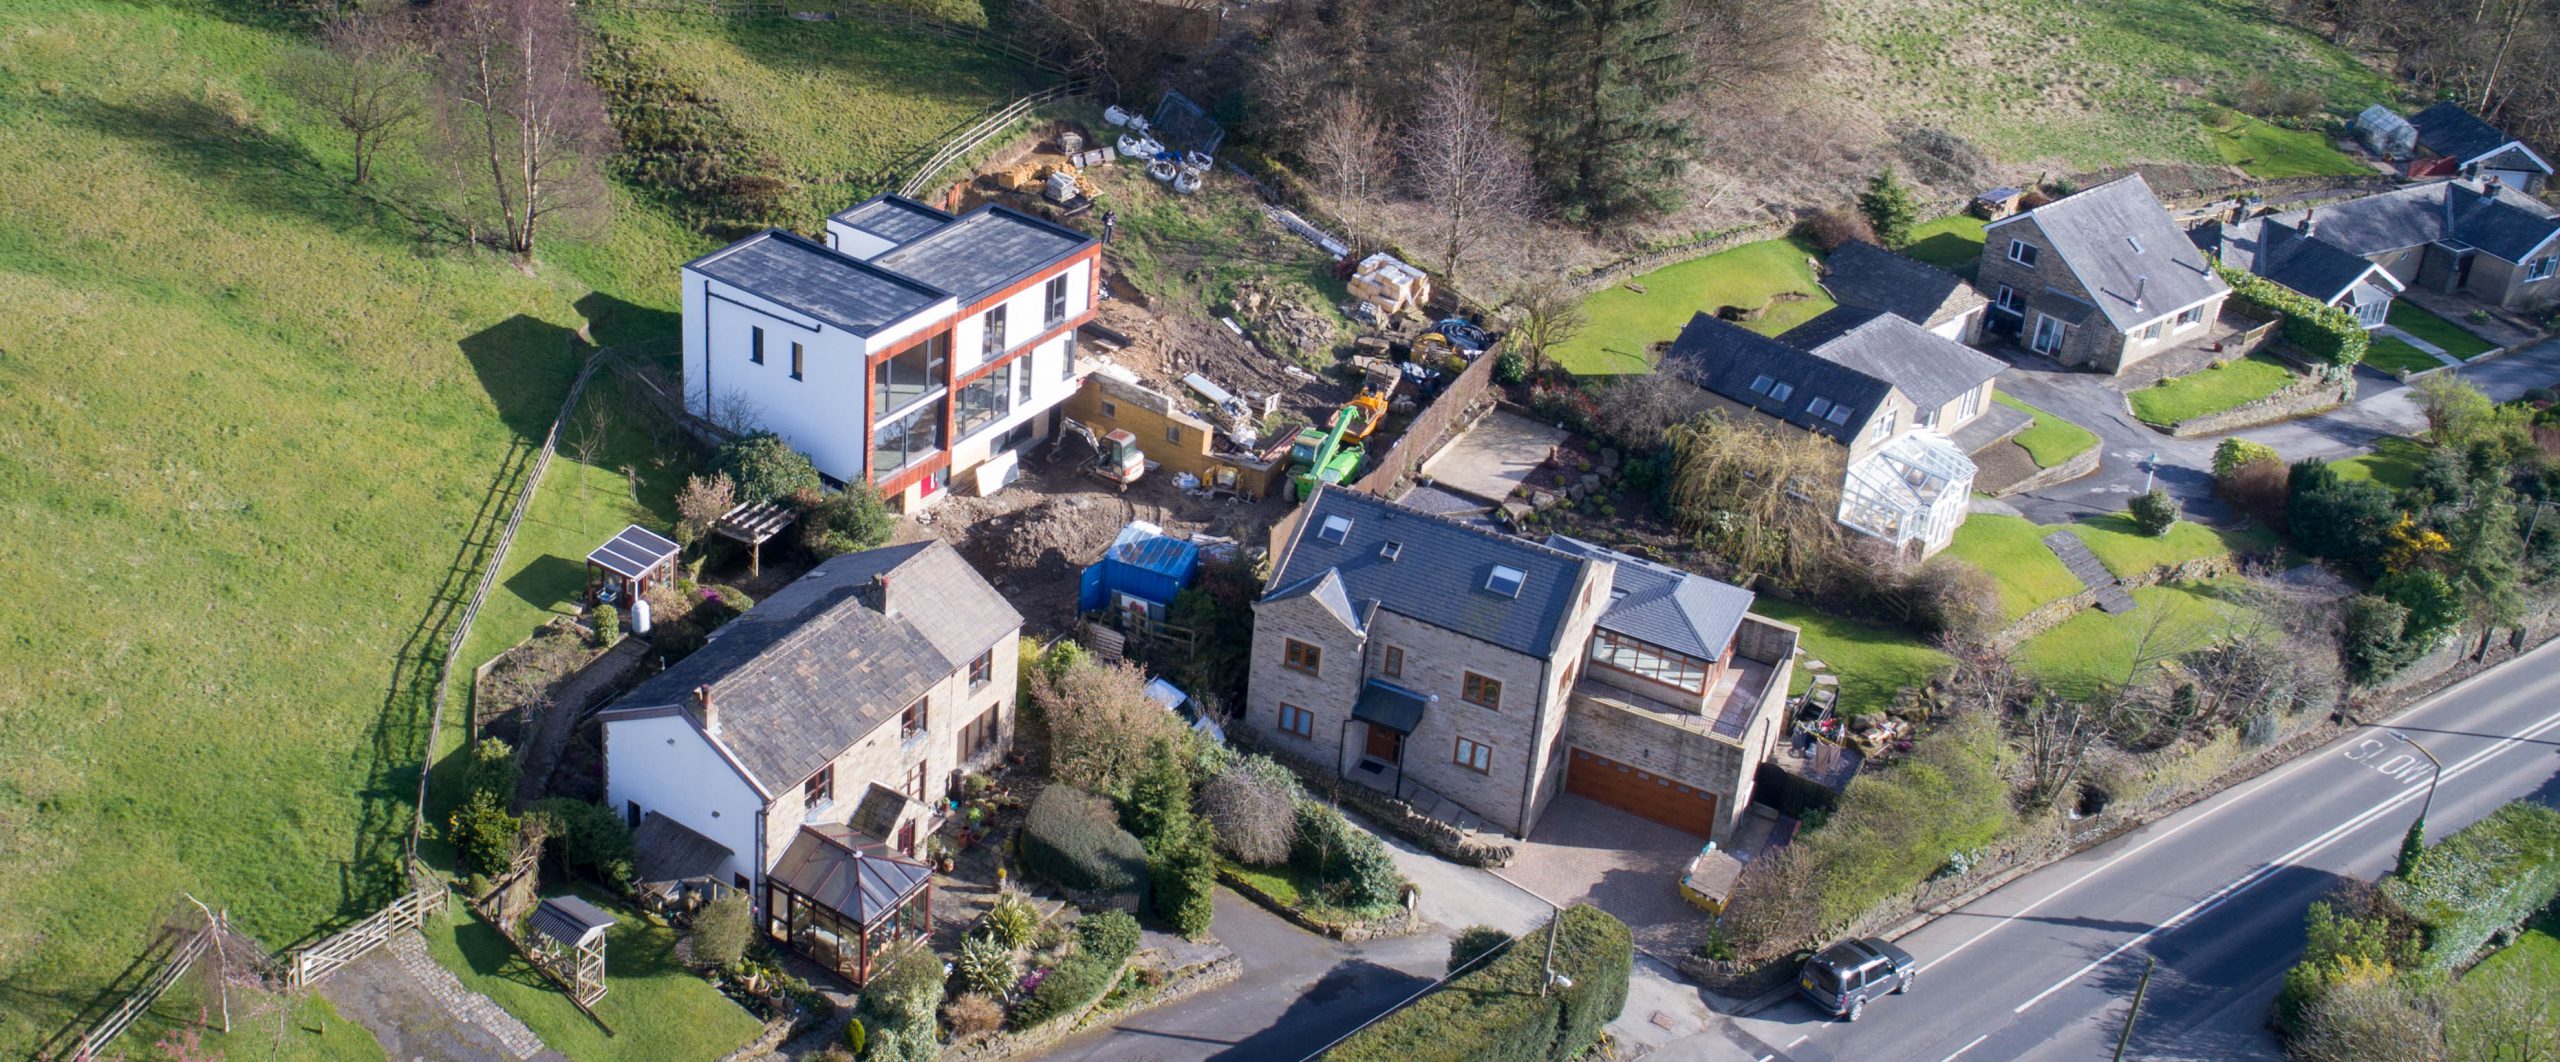 New Build House, Ripponden